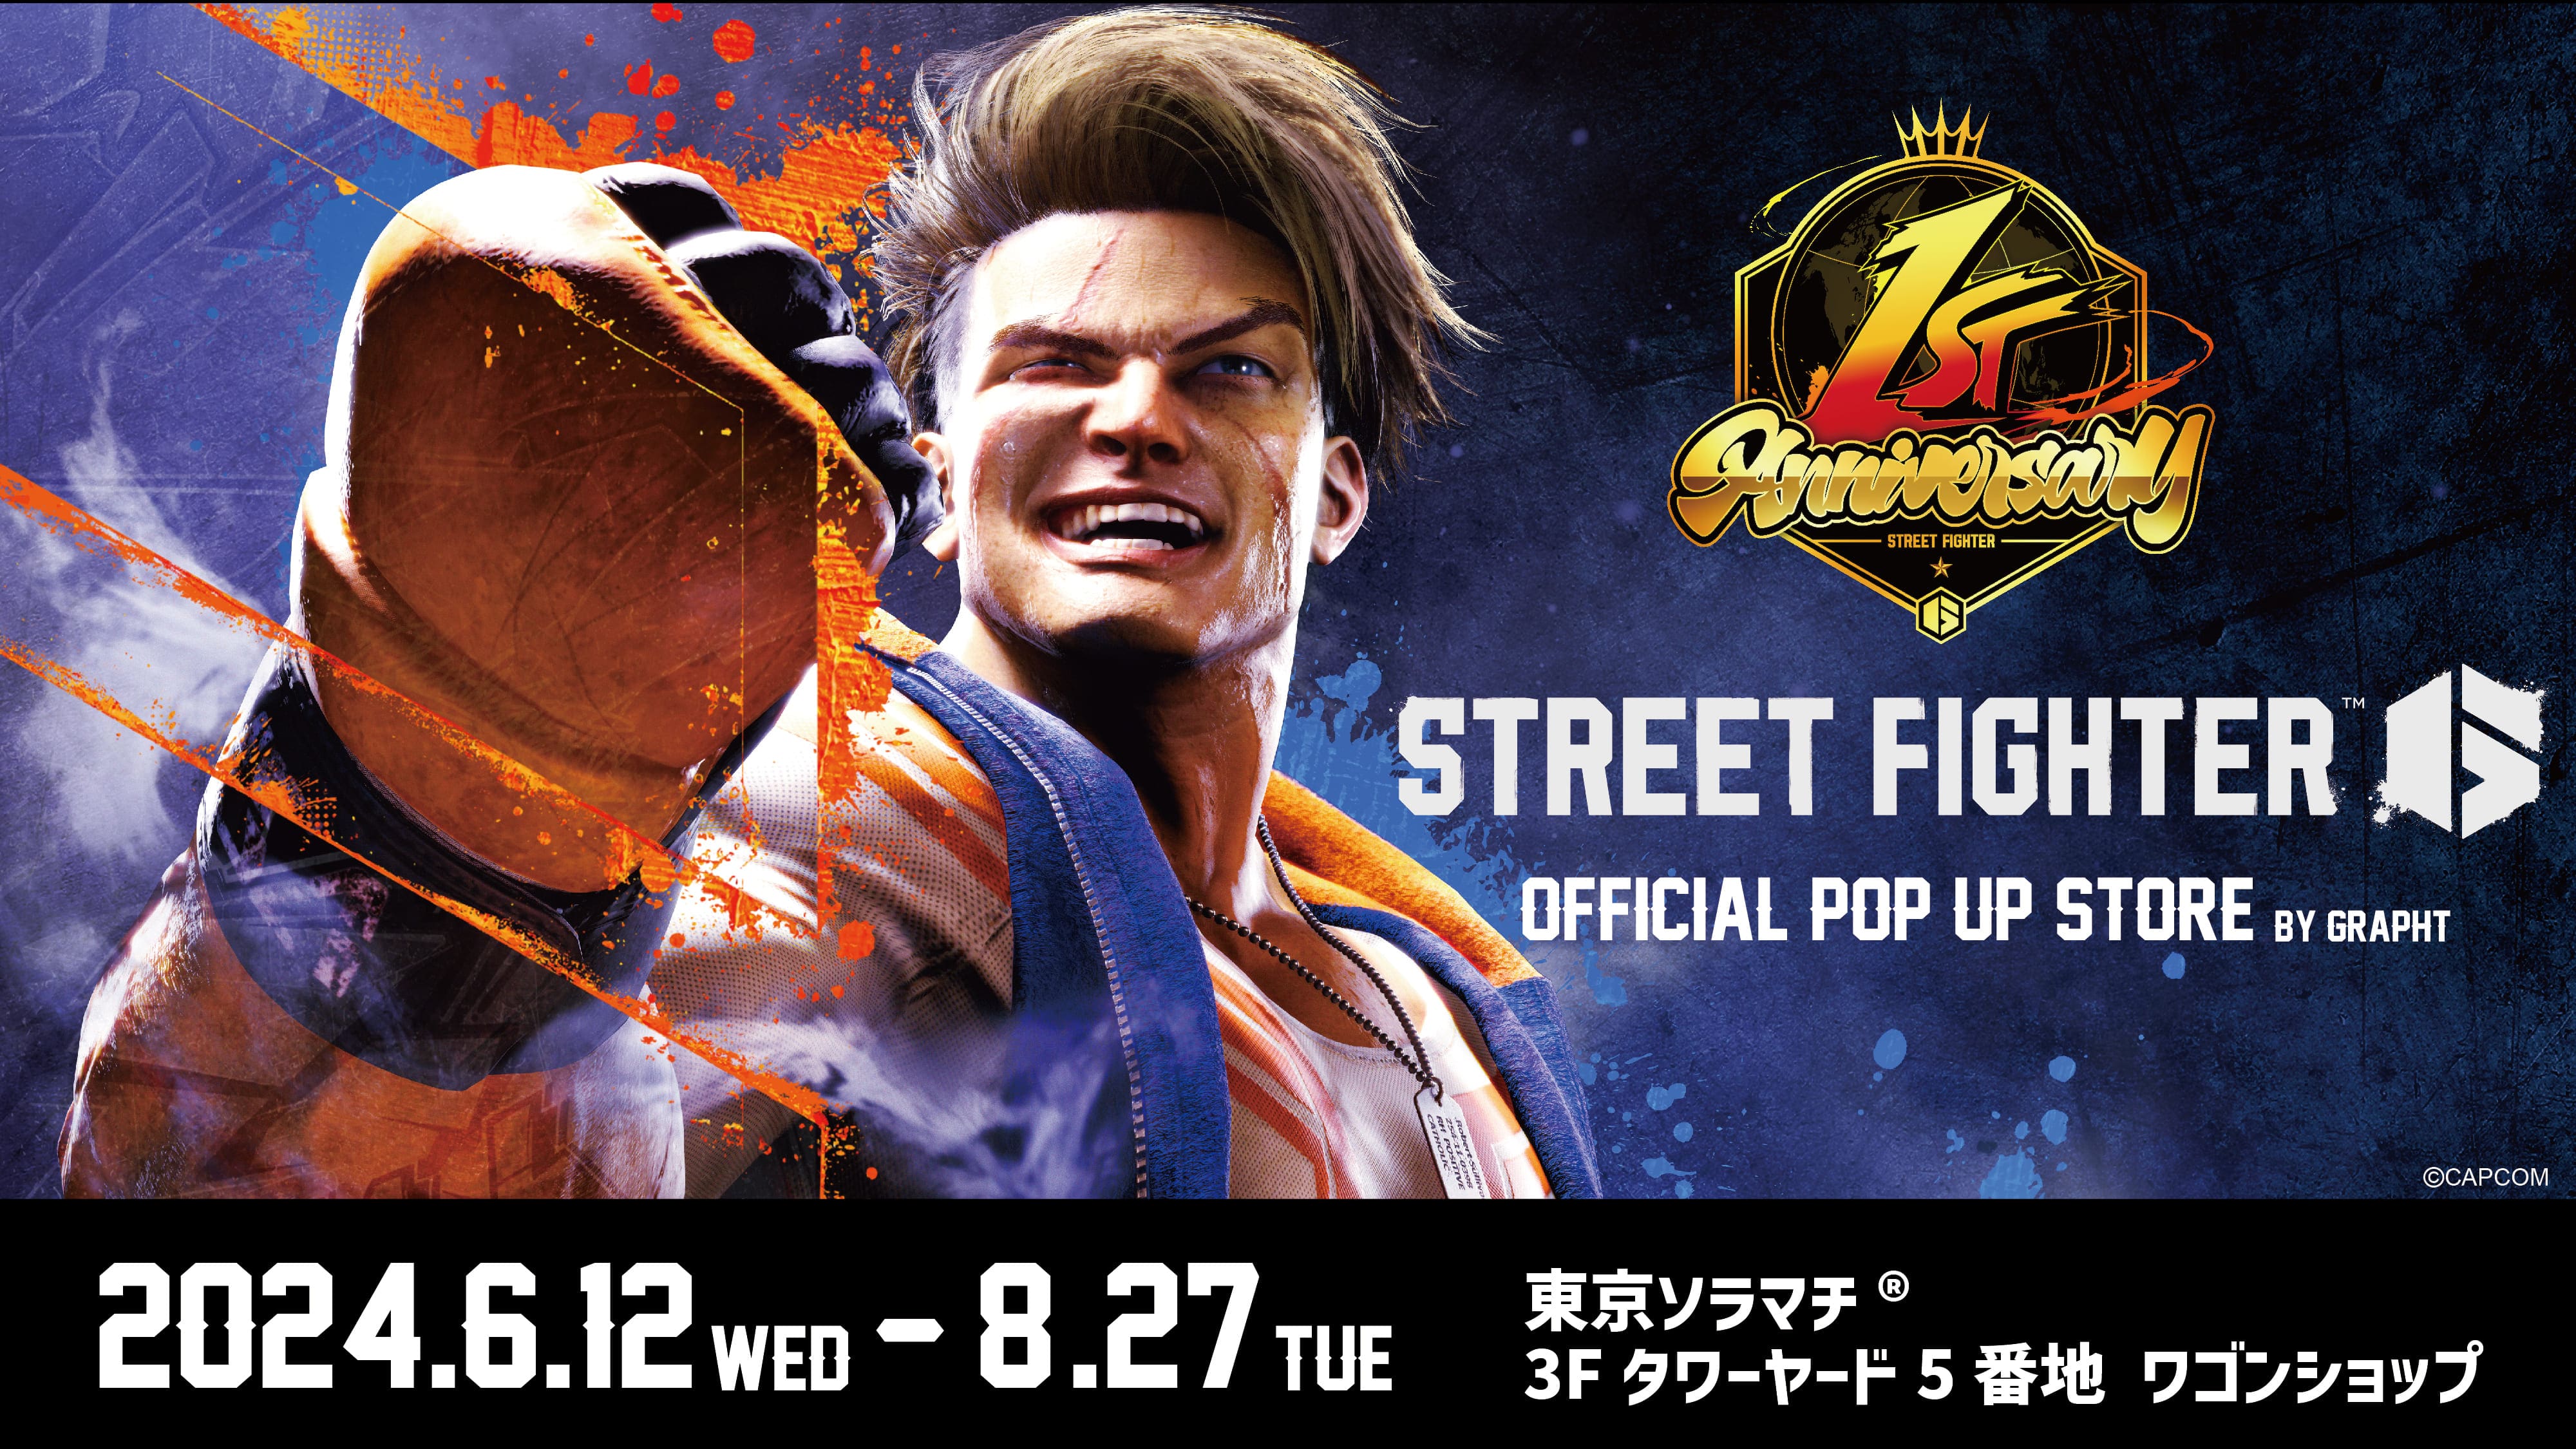 STREET FIGHTER – GRAPHT OFFICIAL STORE